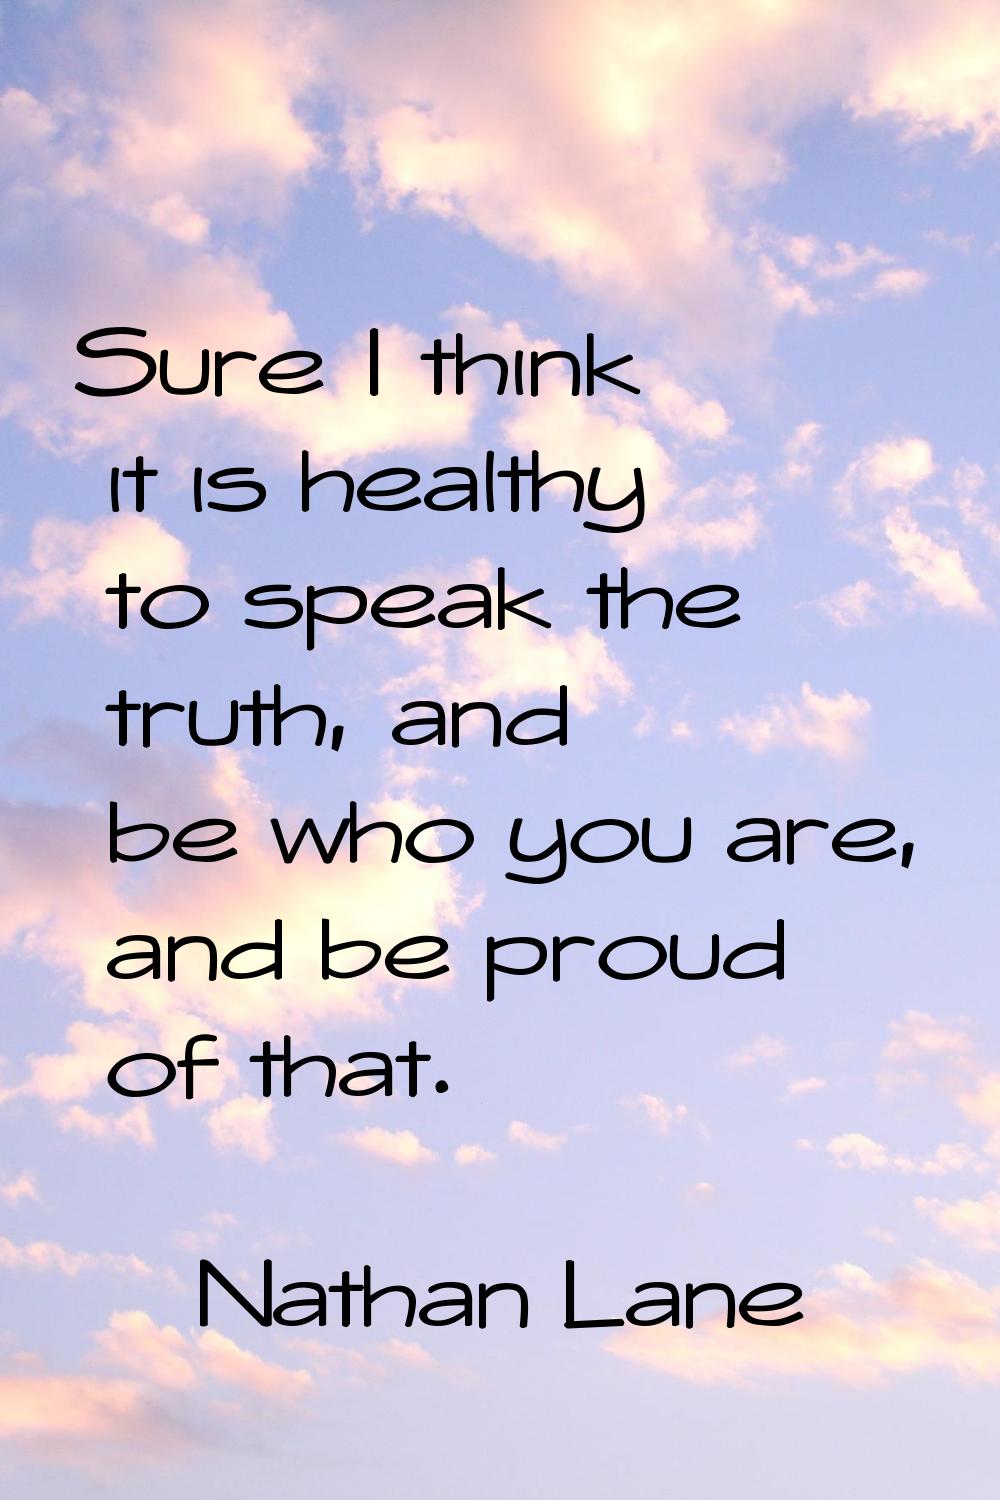 Sure I think it is healthy to speak the truth, and be who you are, and be proud of that.